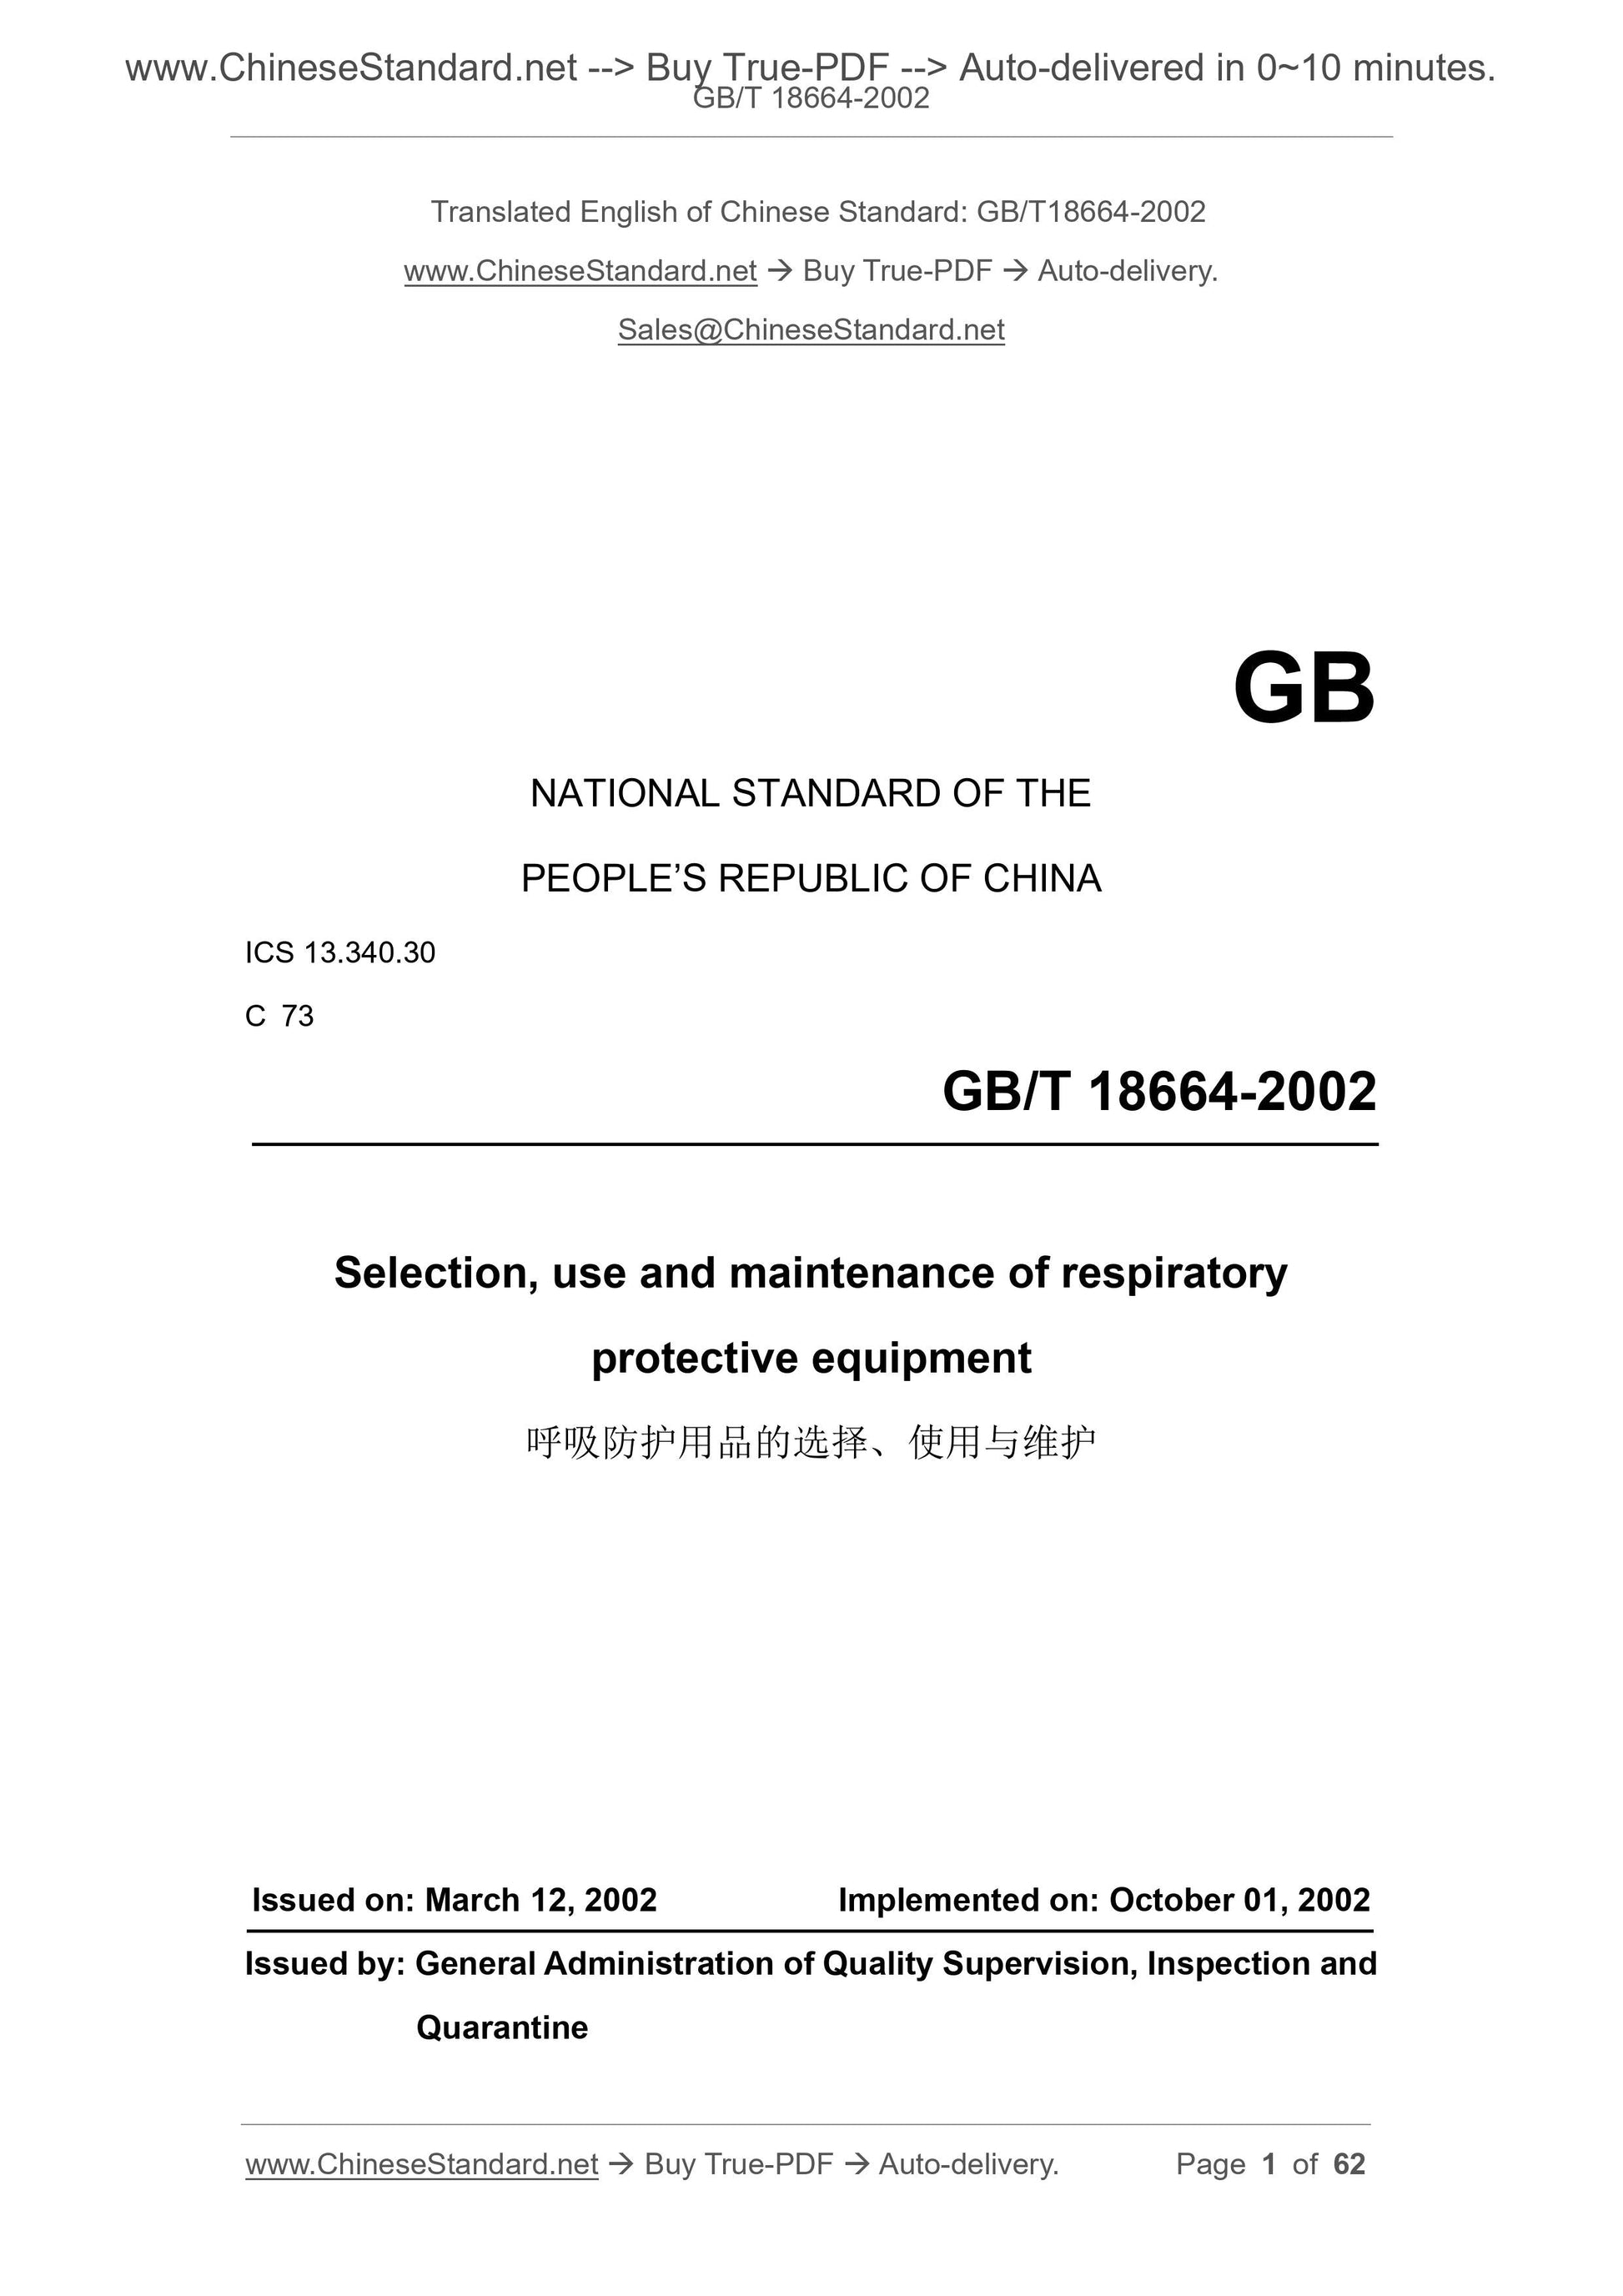 GB/T 18664-2002 Page 1